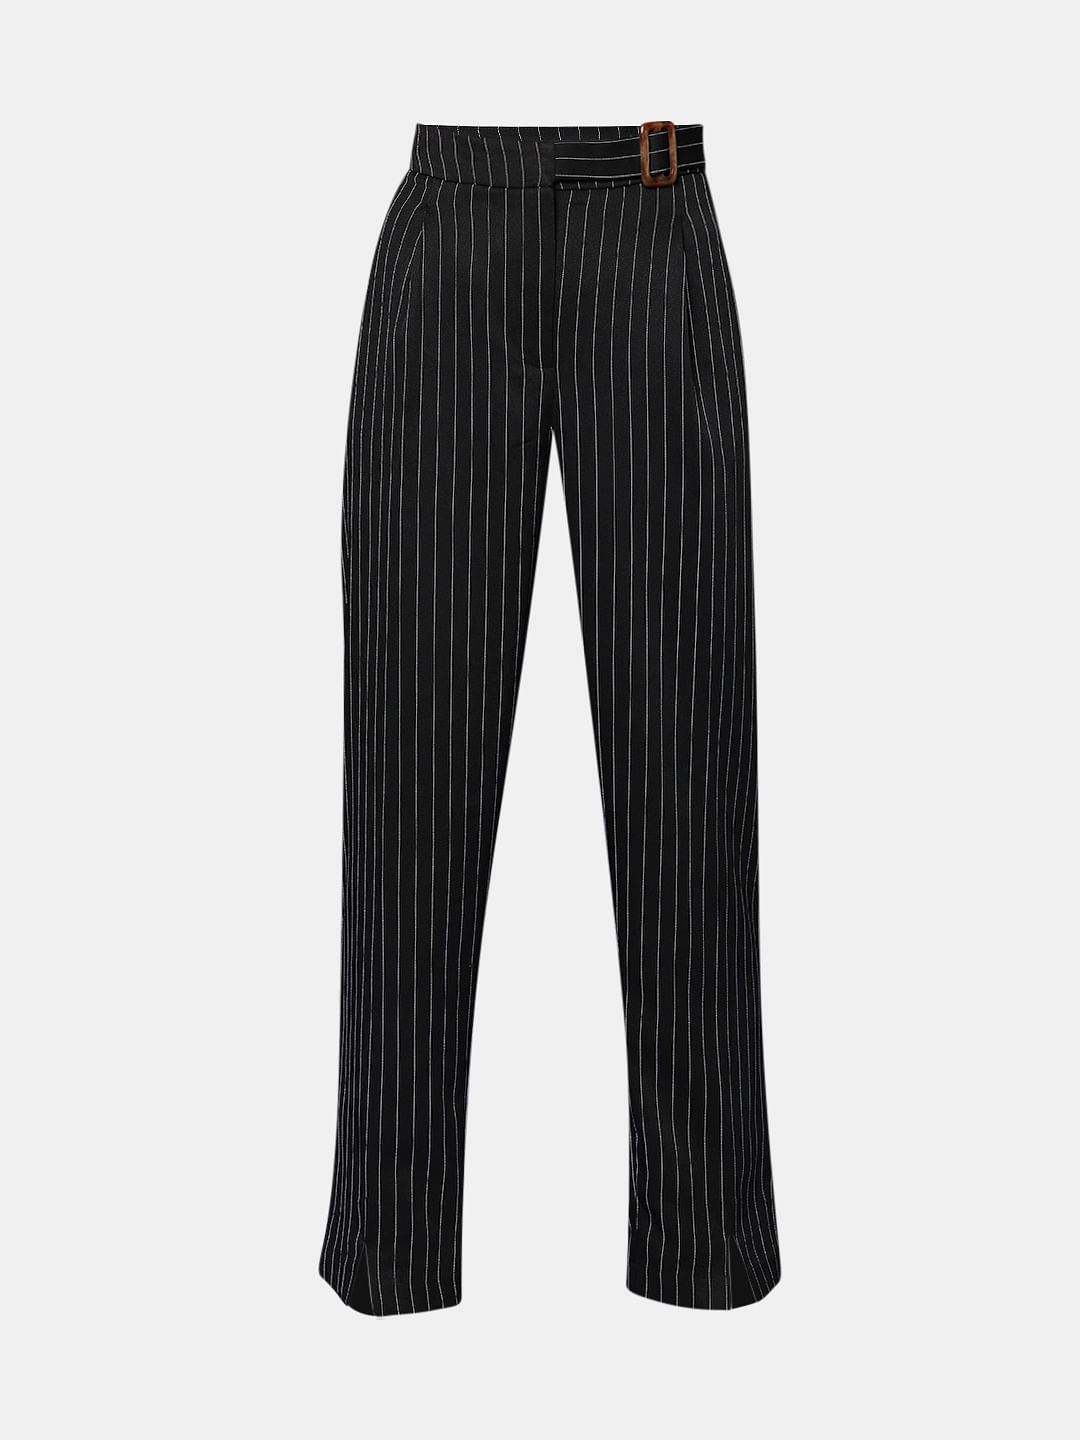 Top 82+ white and black pinstripe trousers - in.cdgdbentre